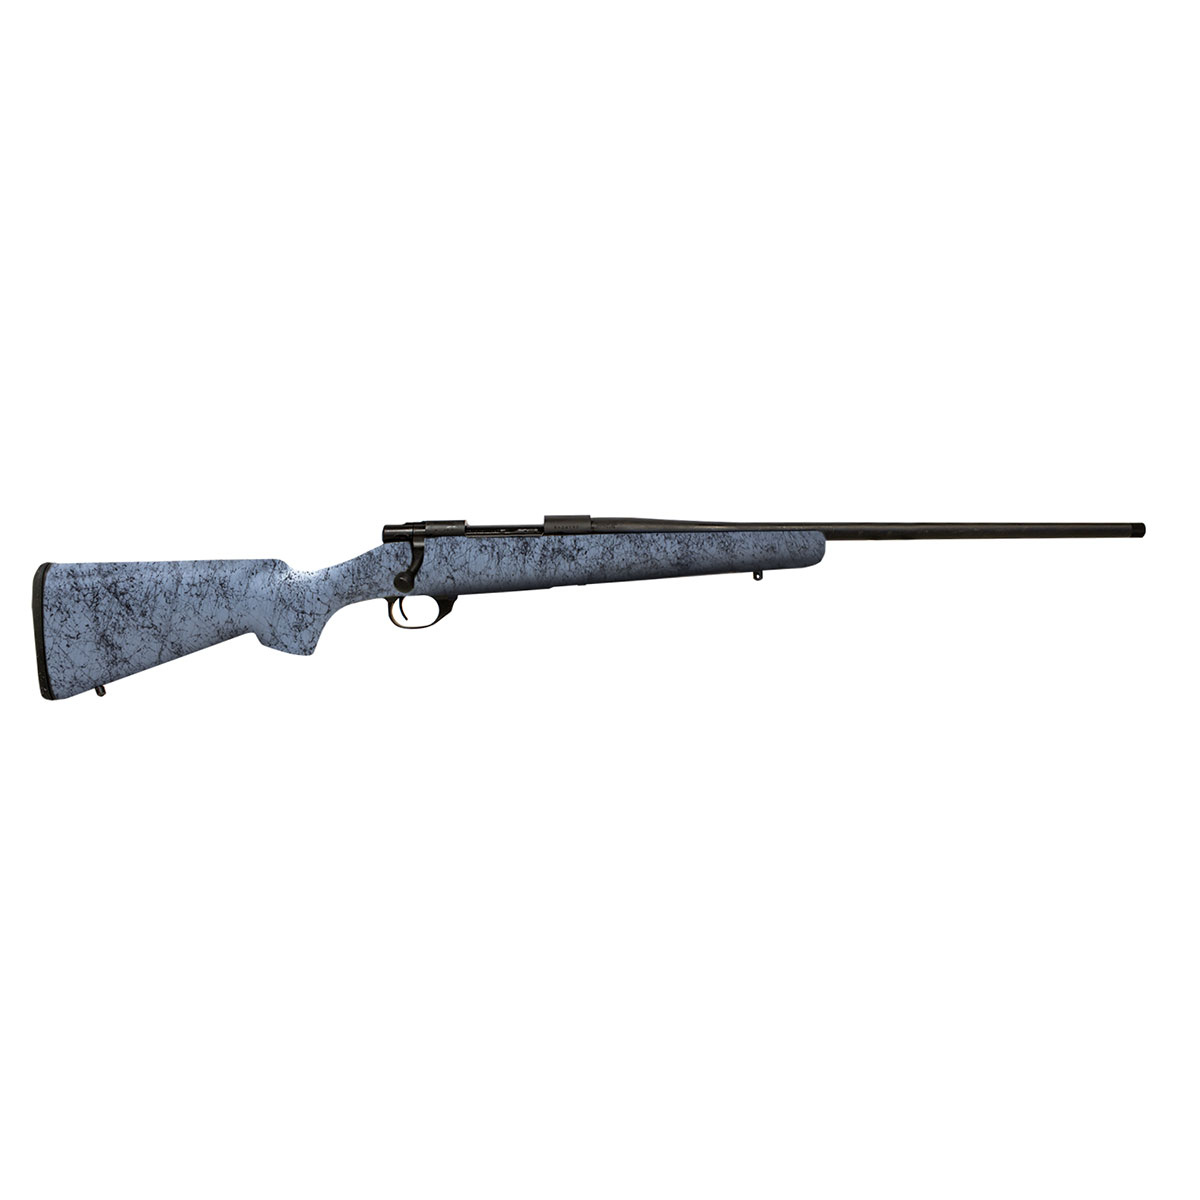 HOWA - M1500 CARBON STALKER 308 WINCHESTER BOLT-ACTION RIFLE